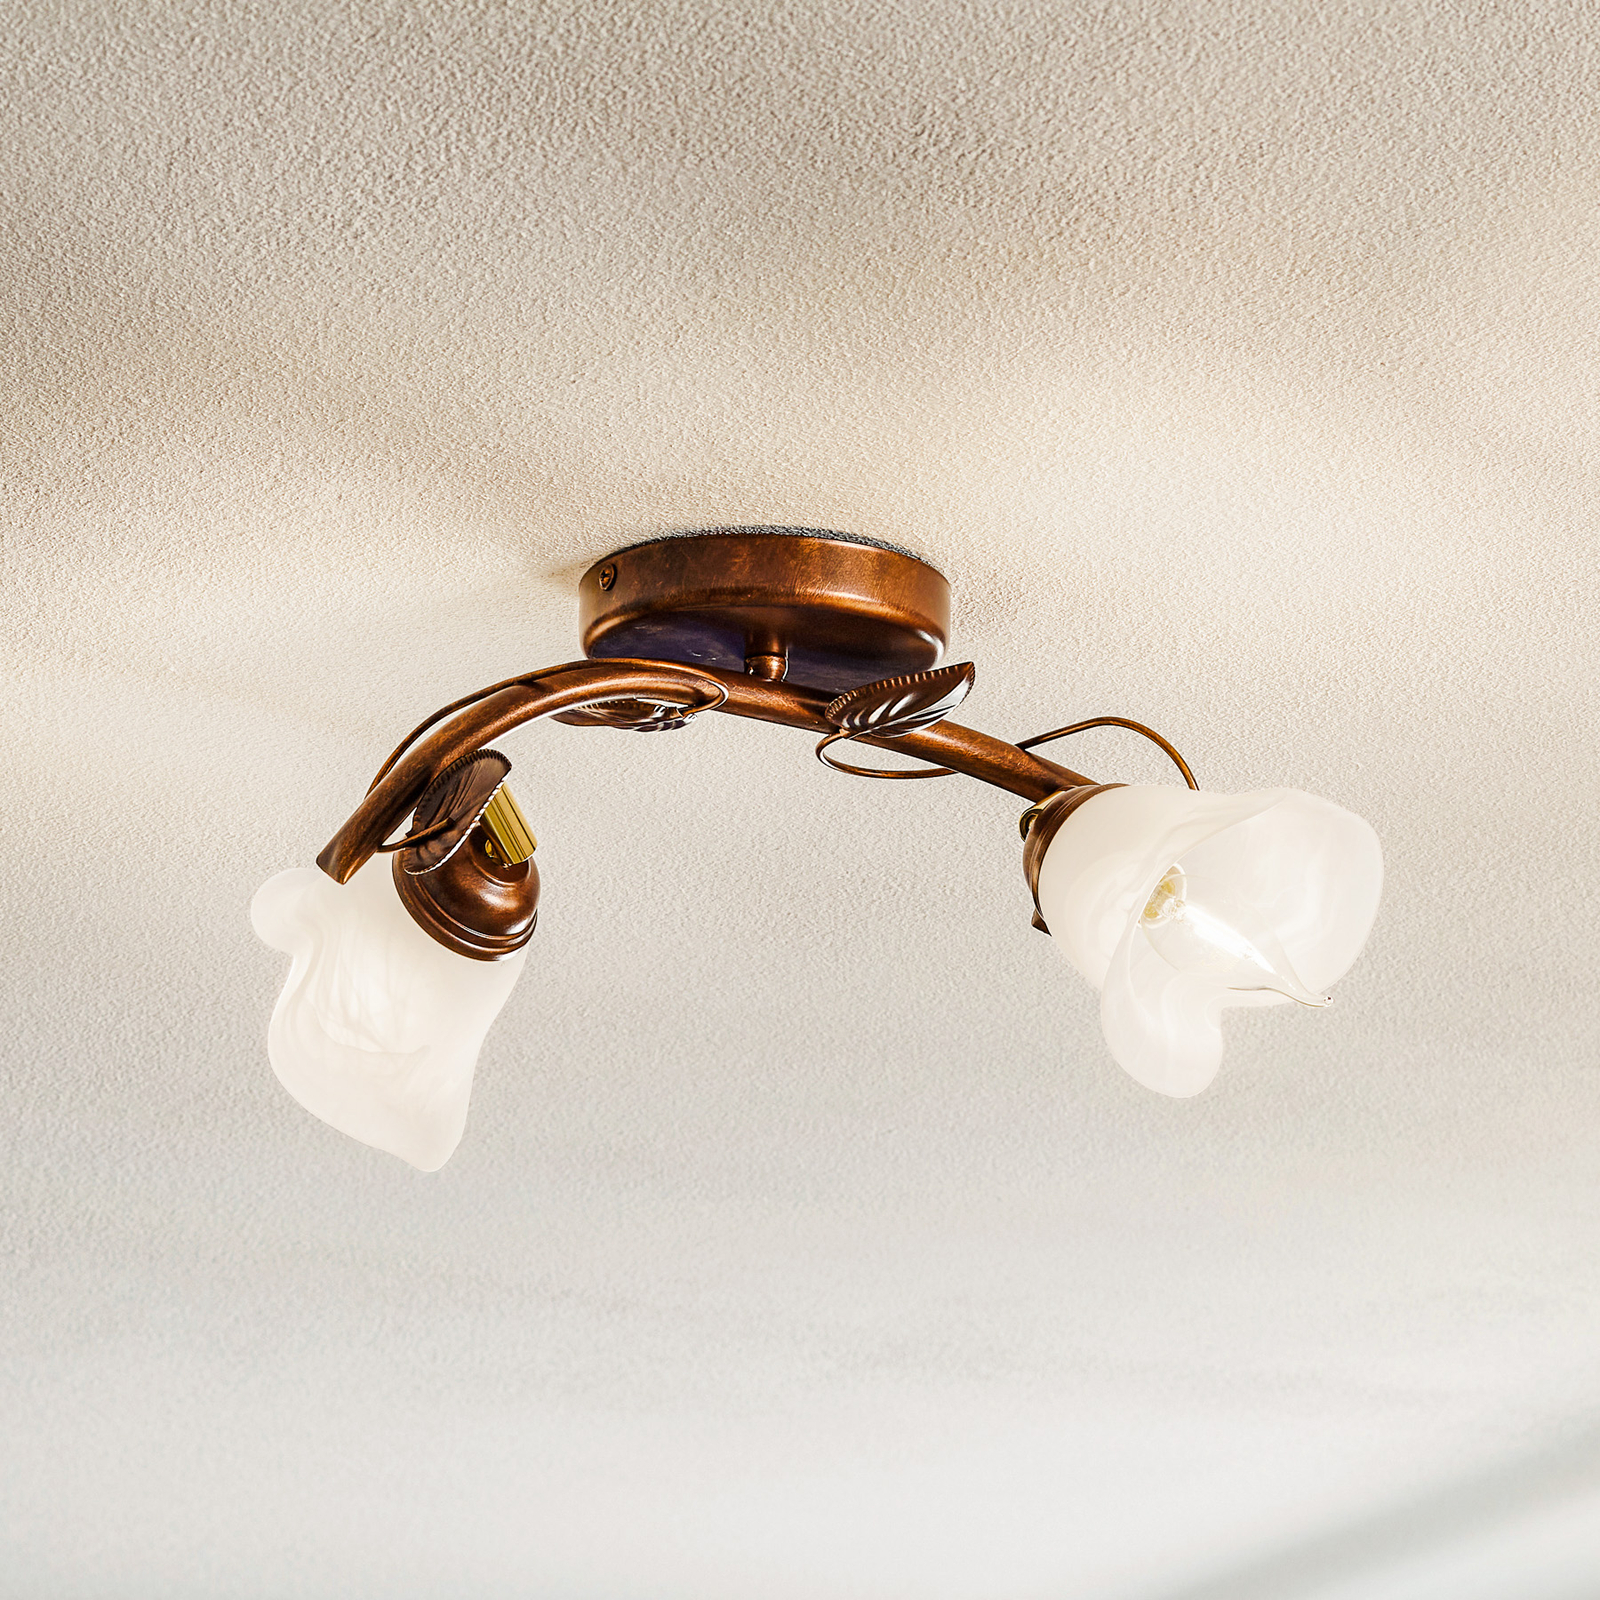 Siena ceiling light, Florentine style, two-bulb